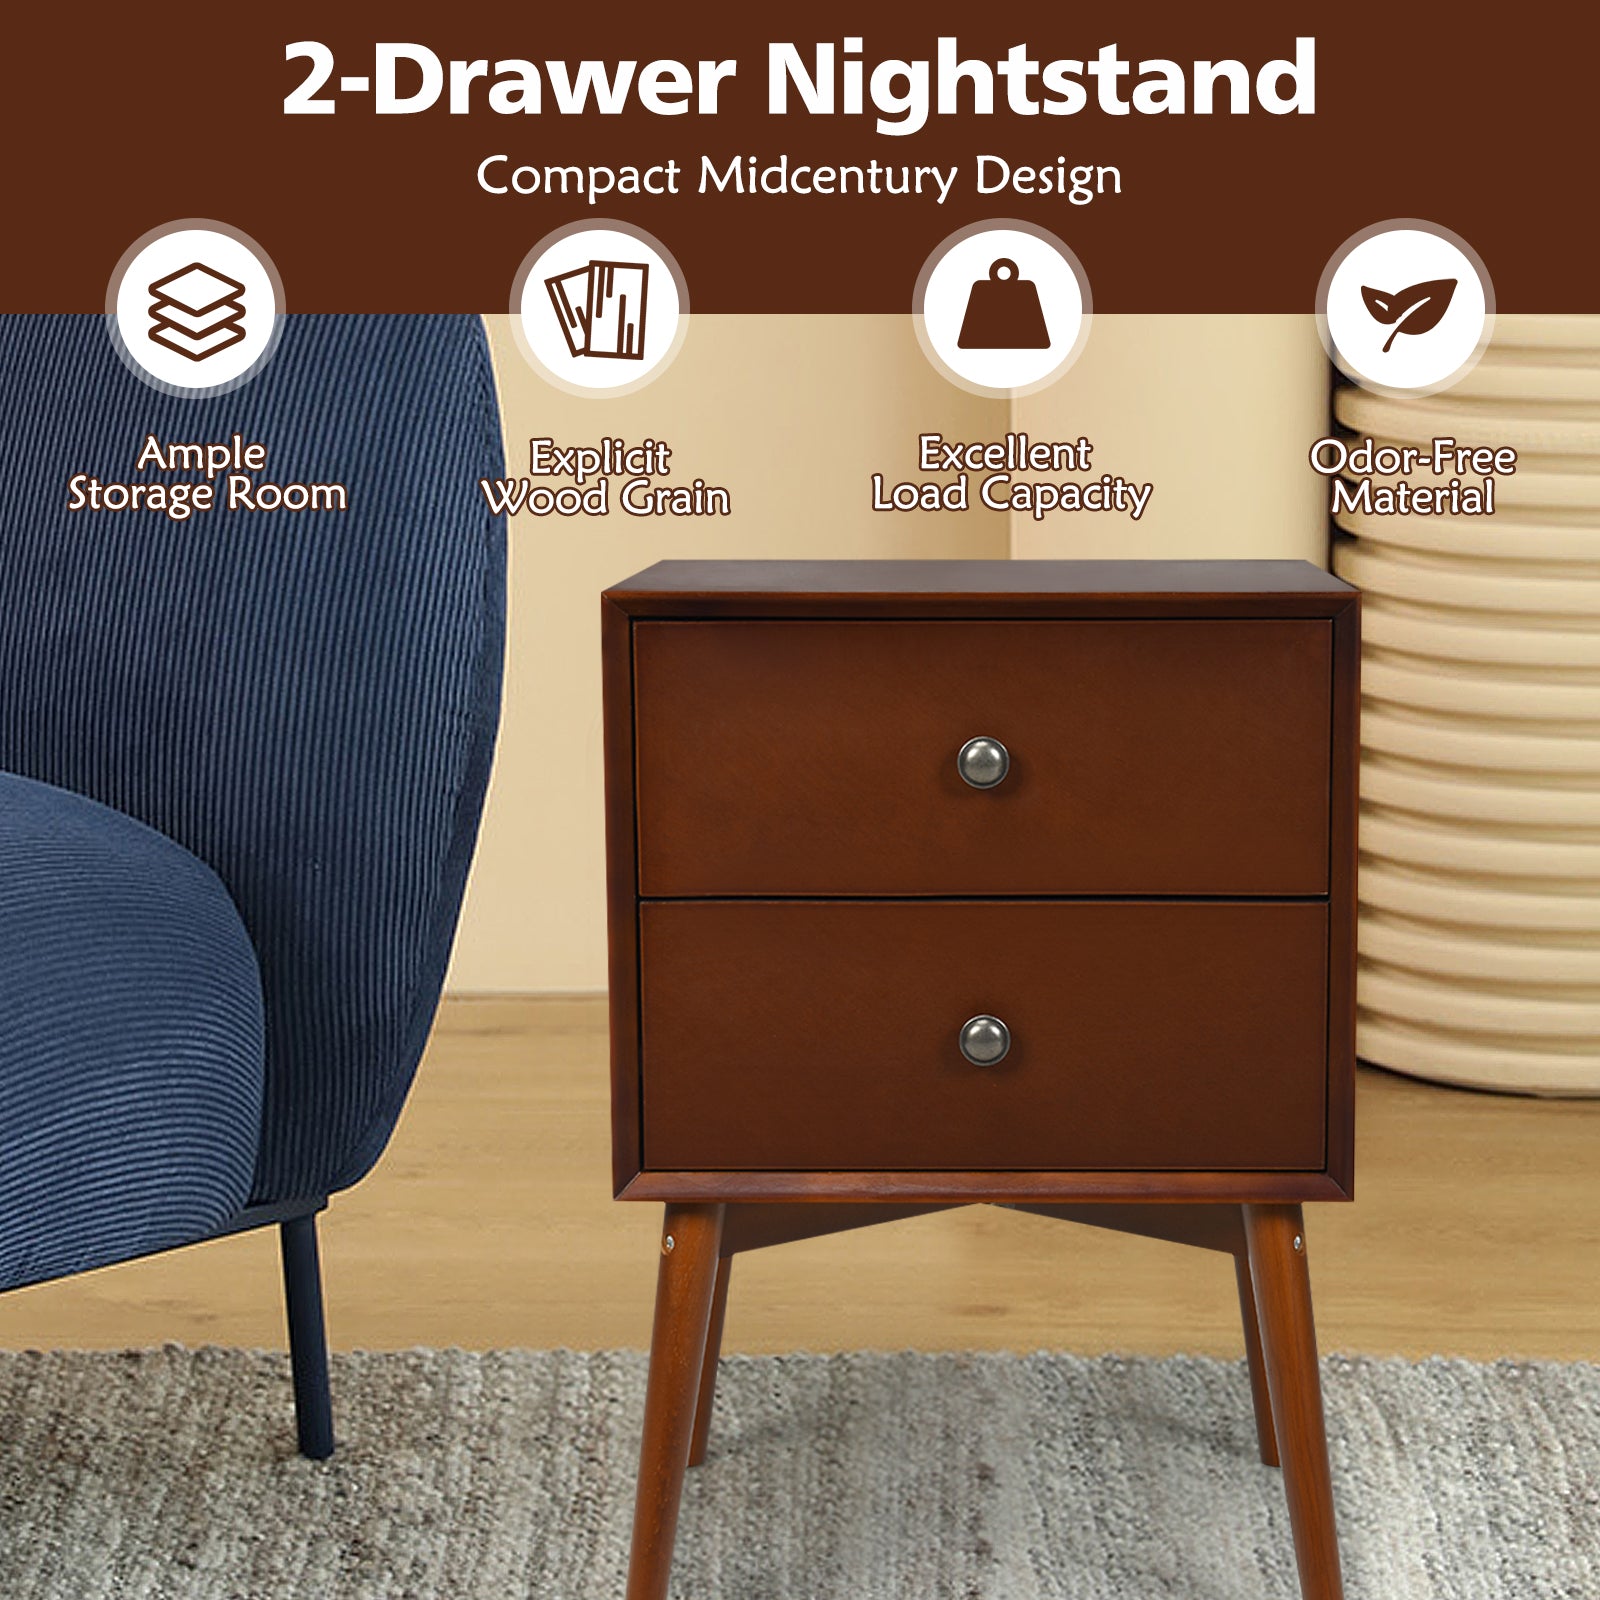 Giantex End Table with Drawers and Metal Knobs(1, Brown)